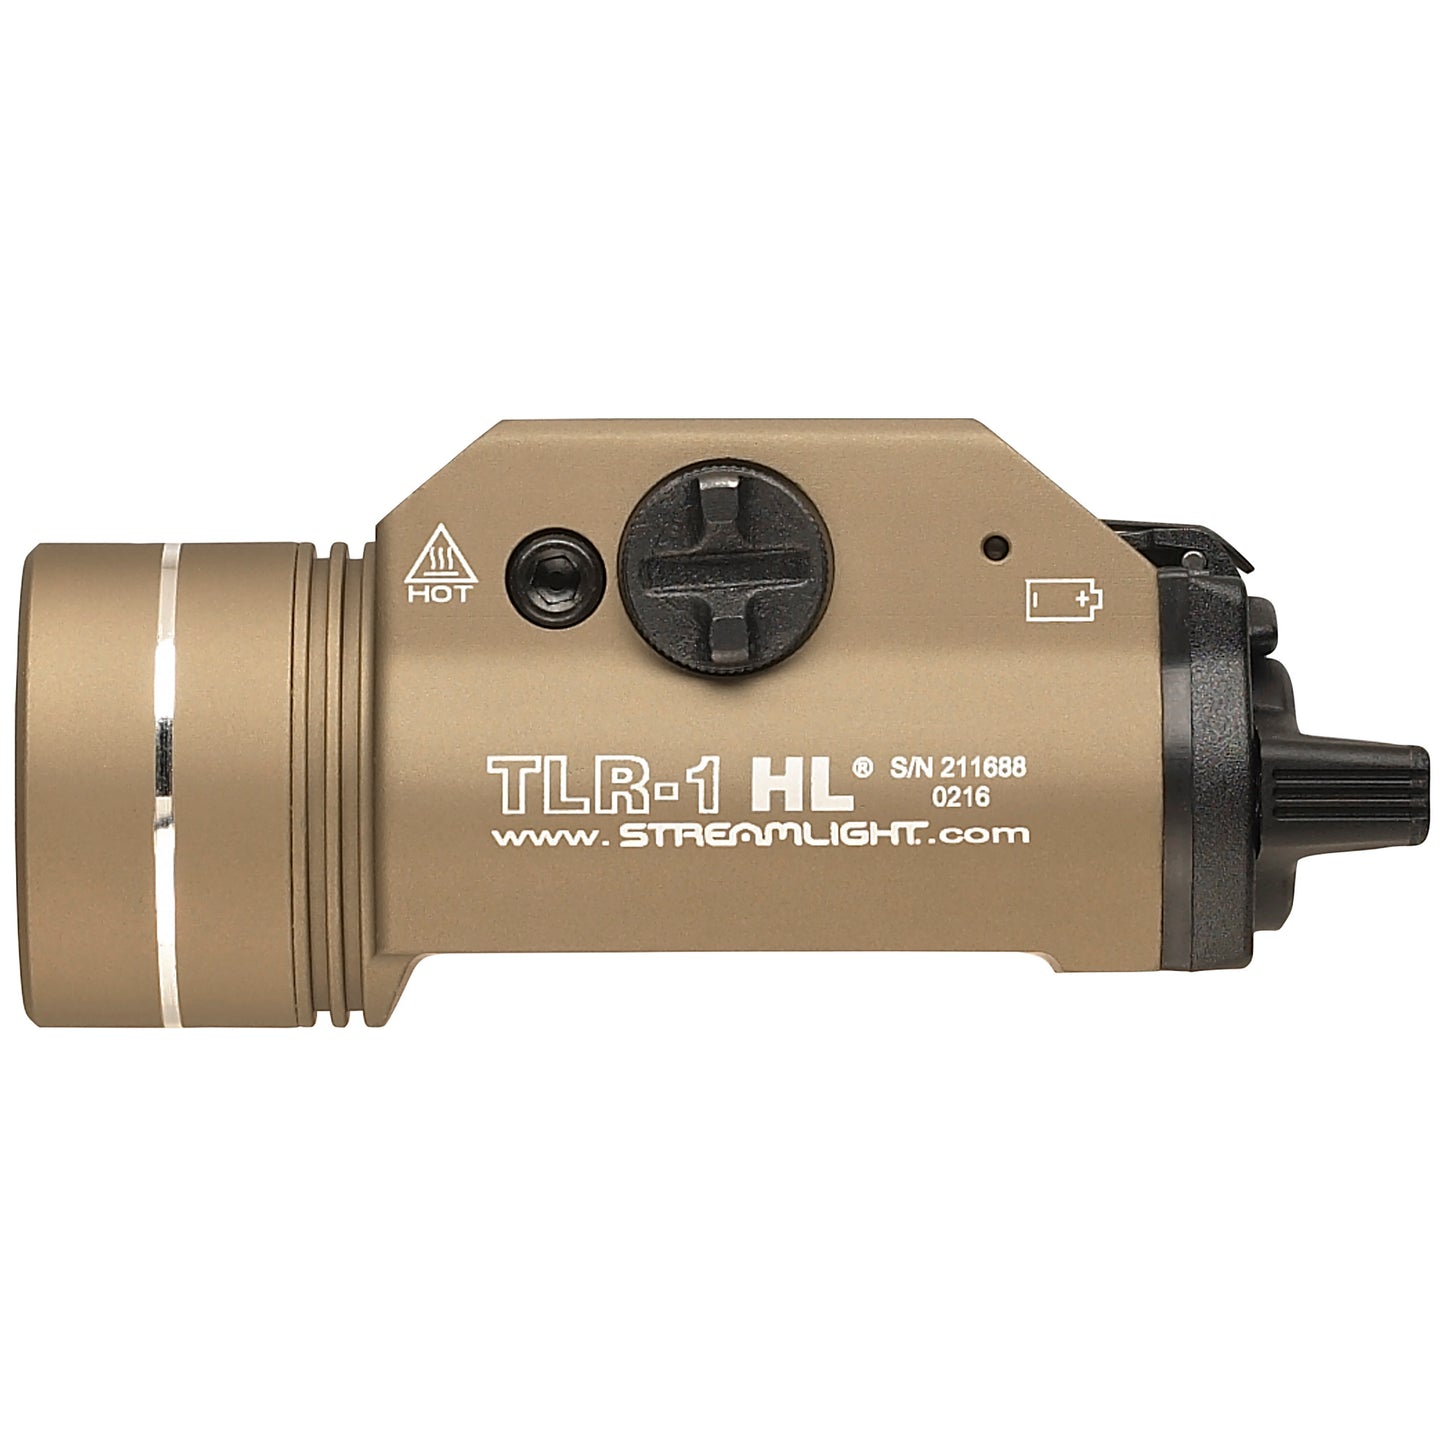 Streamlight, TLR-1 HL, High Lumen Rail Mounted Tactical Light, Pistol and Picatinny, Flat Dark Earth, C4 LED 1000 Lumens With Strobe, 2x CR123 Batteries